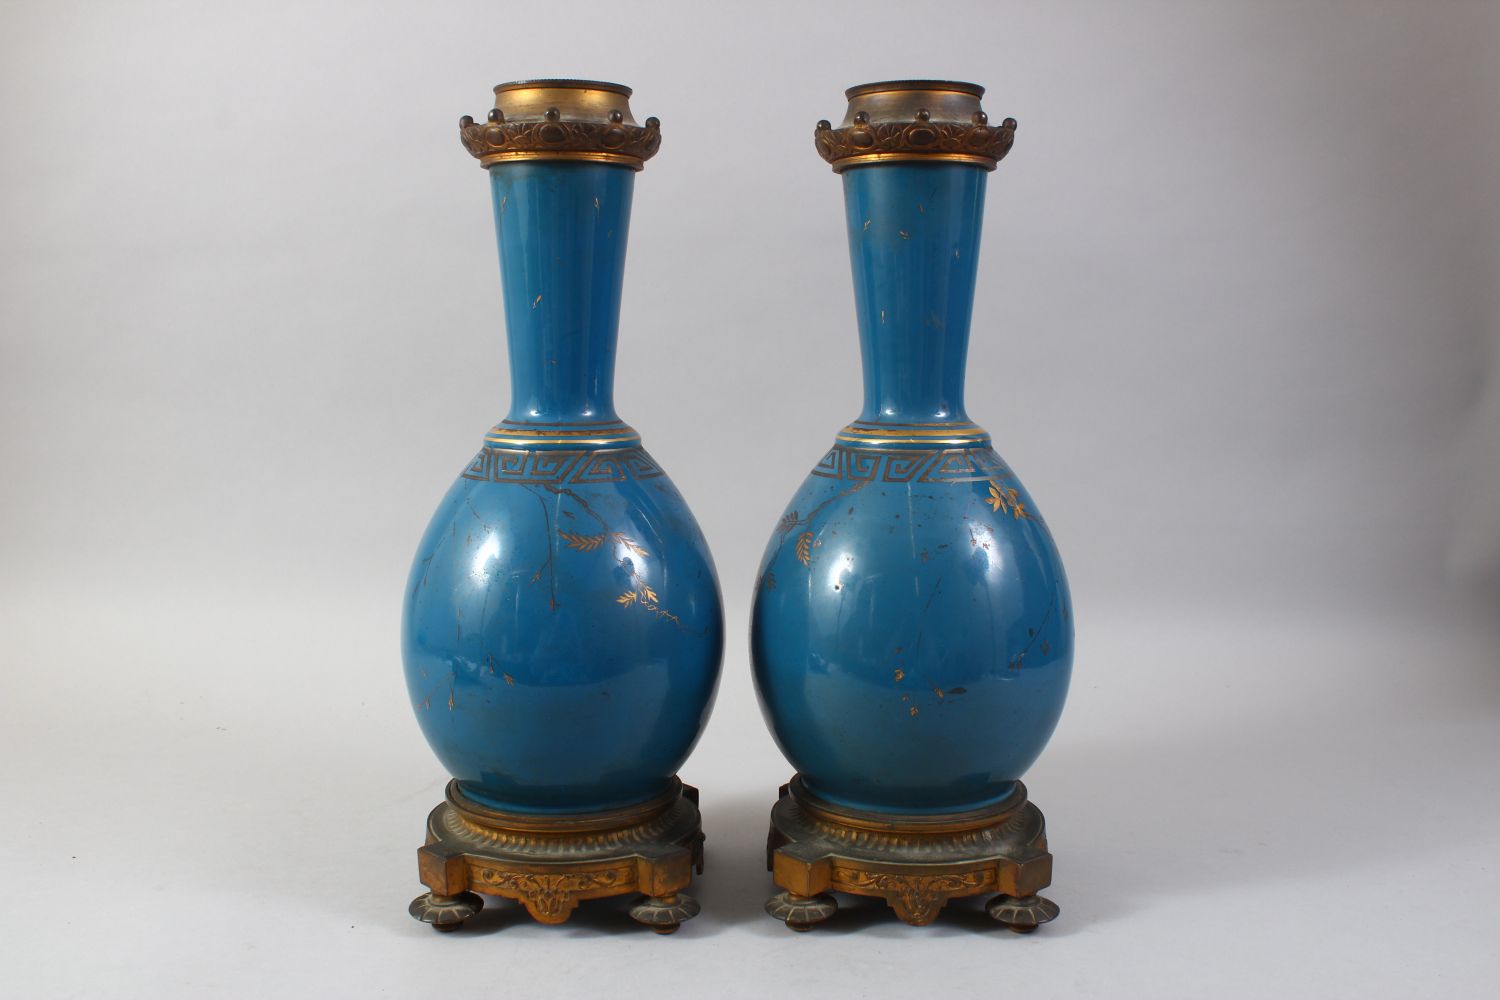 A PAIR OF 19TH CENTURY CHINESE PORCELAIN BOTTLE VASES / LAMP BASES, the ground with gilded - Image 4 of 9